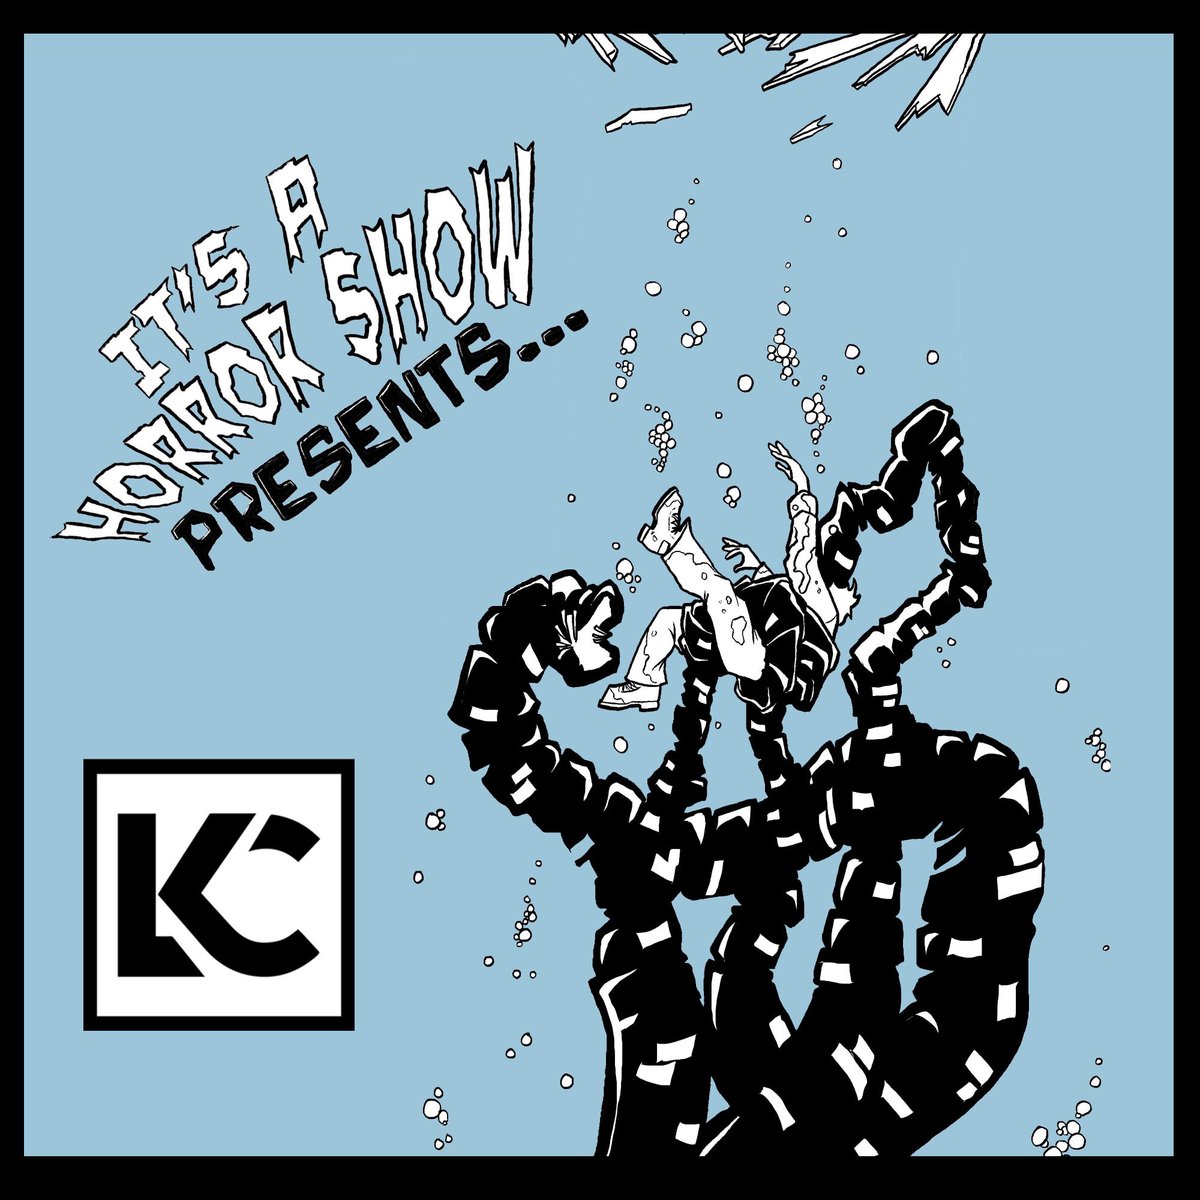 It’s A Horror Show Presents: The Early Bird is a chilling ice fishing horror story from myself and Jade Lowder Tremors on ice in the vein of Creepshow and Tales from the Crypt. Link👇 kickstarter.com/projects/bdepi… Published with @lesserknowncomics and @comixwellspring #indiecomics